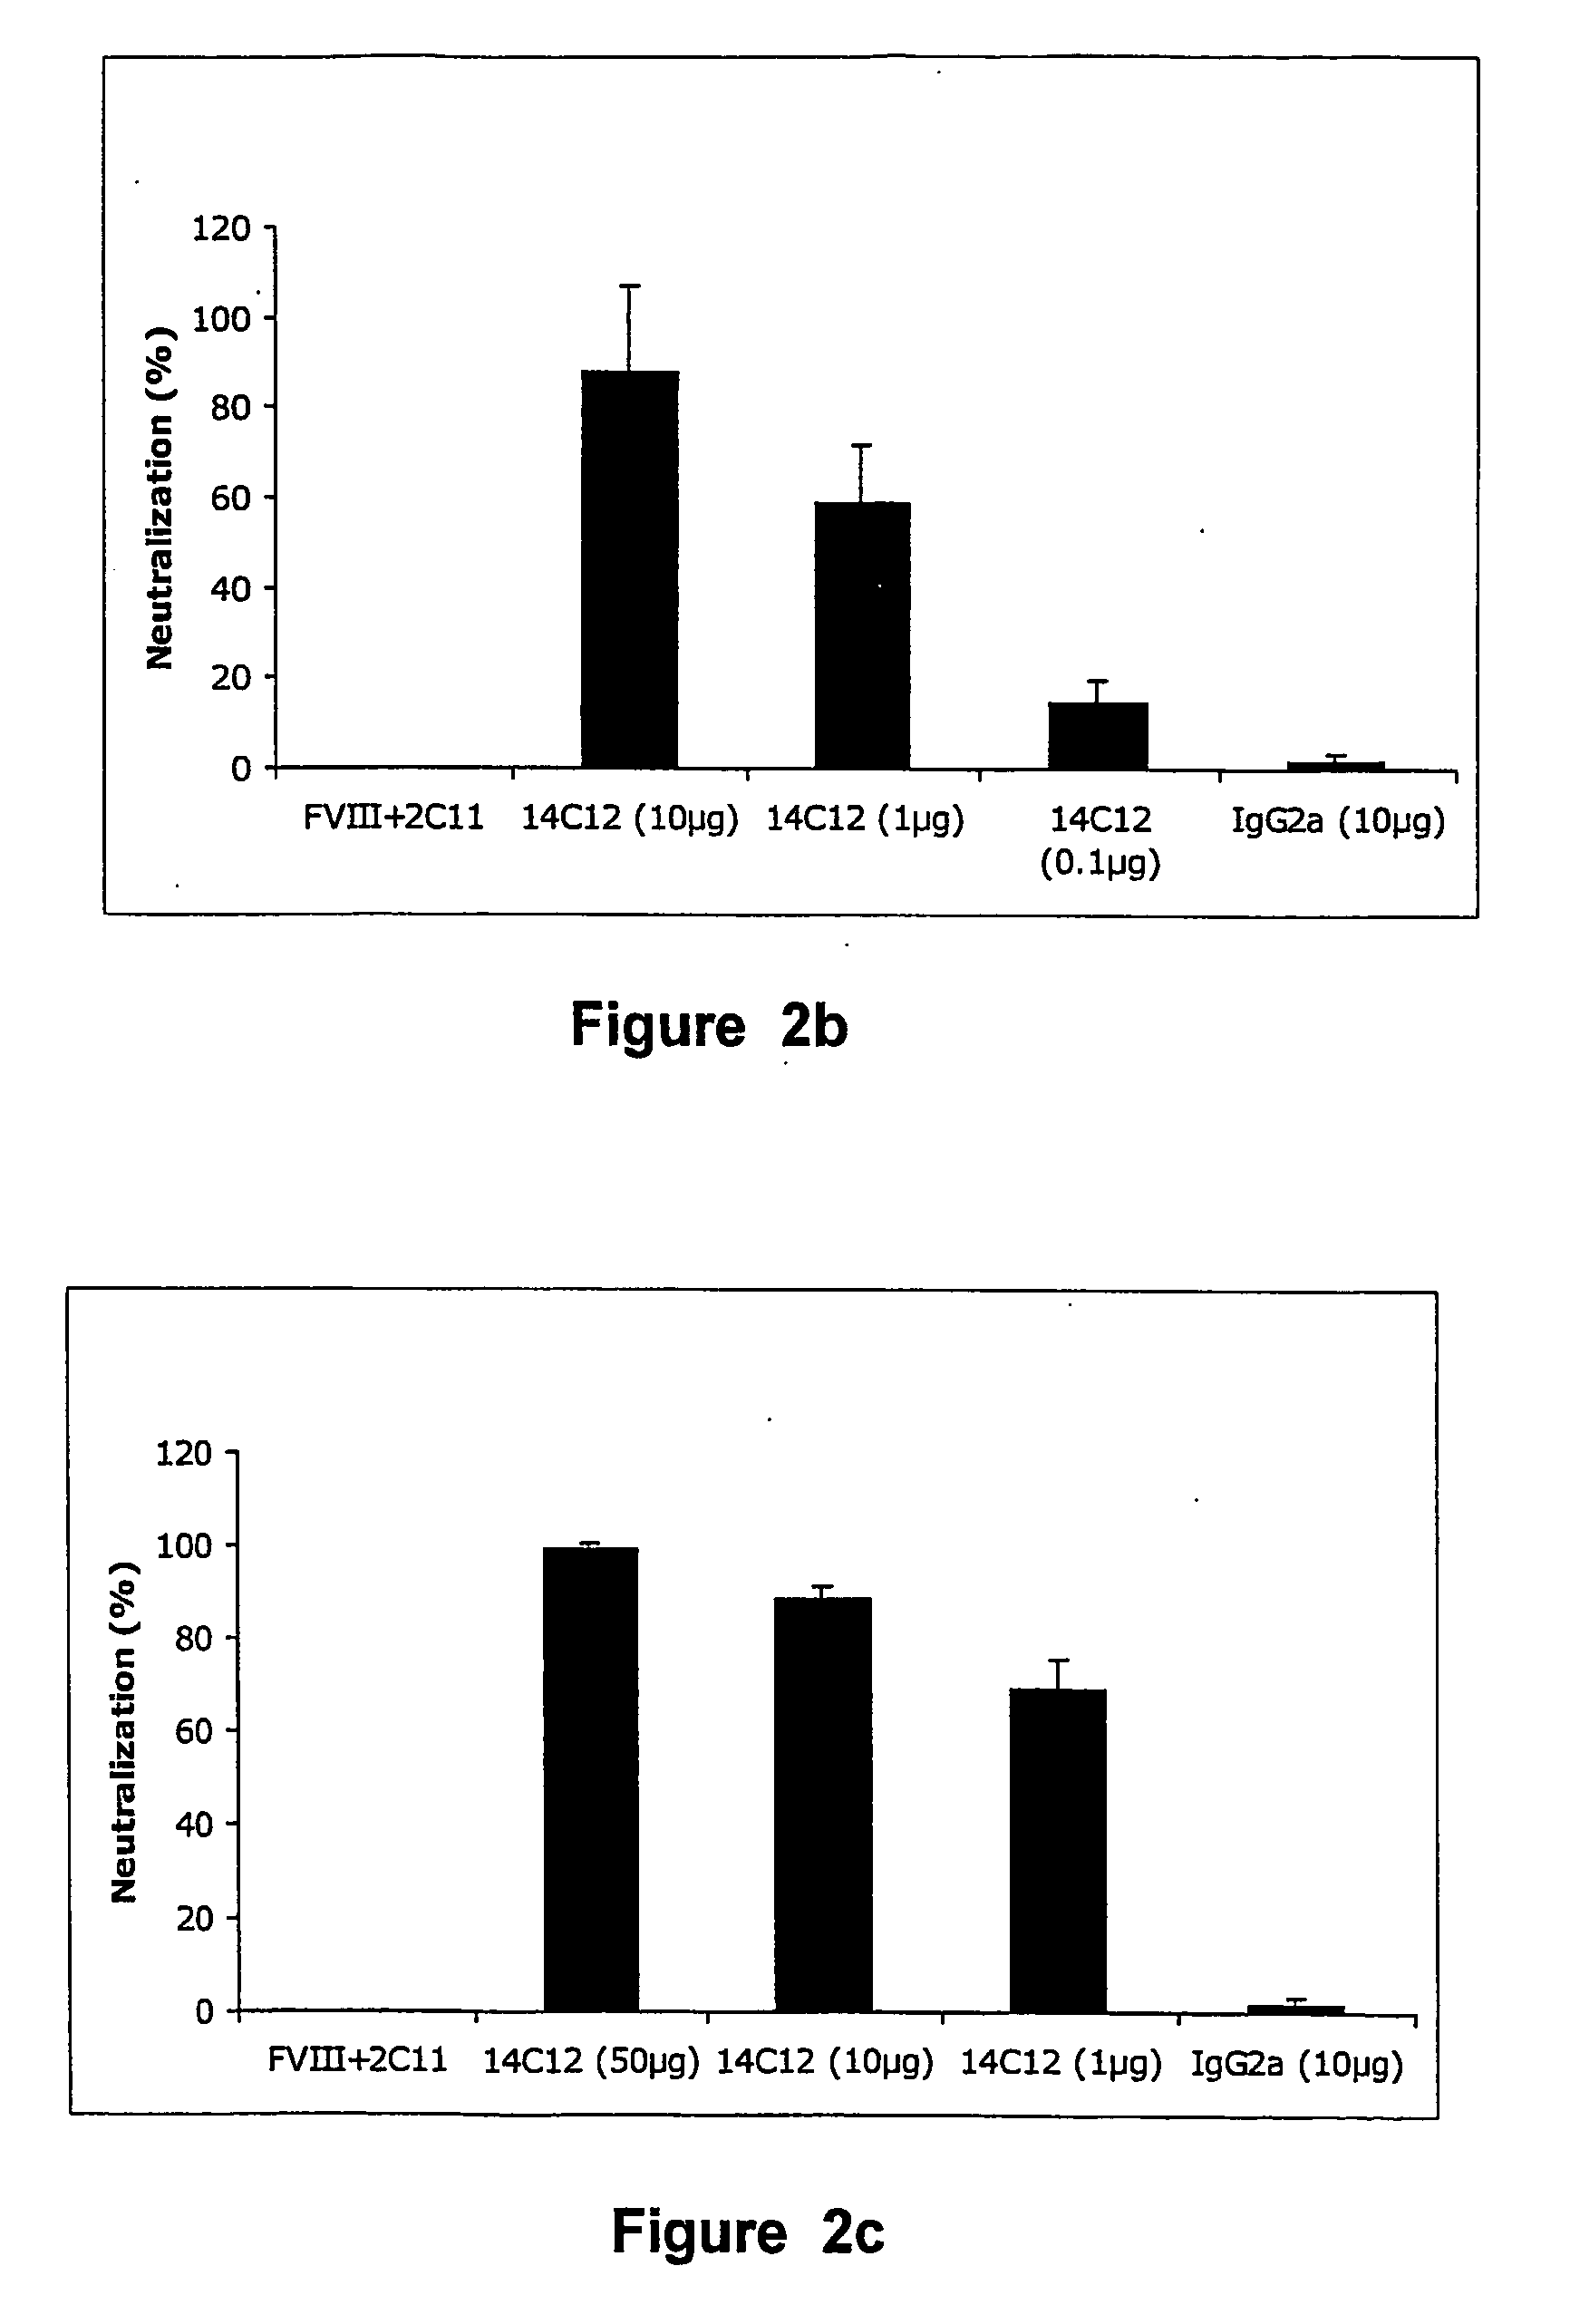 Anti-idiotypic antibodies against factor VIII inhibitor and uses thereof